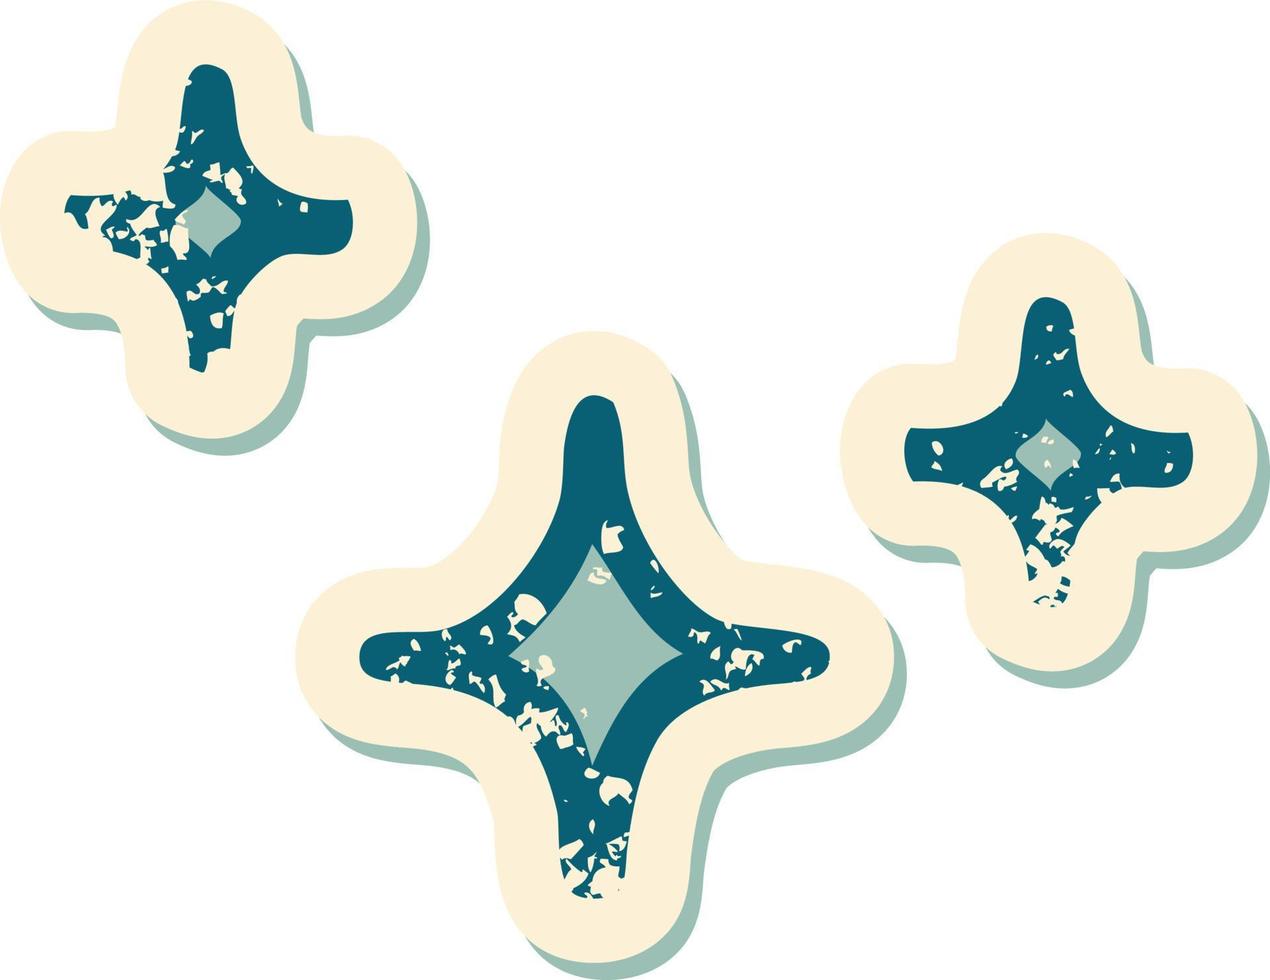 iconic distressed sticker tattoo style image of a stars vector